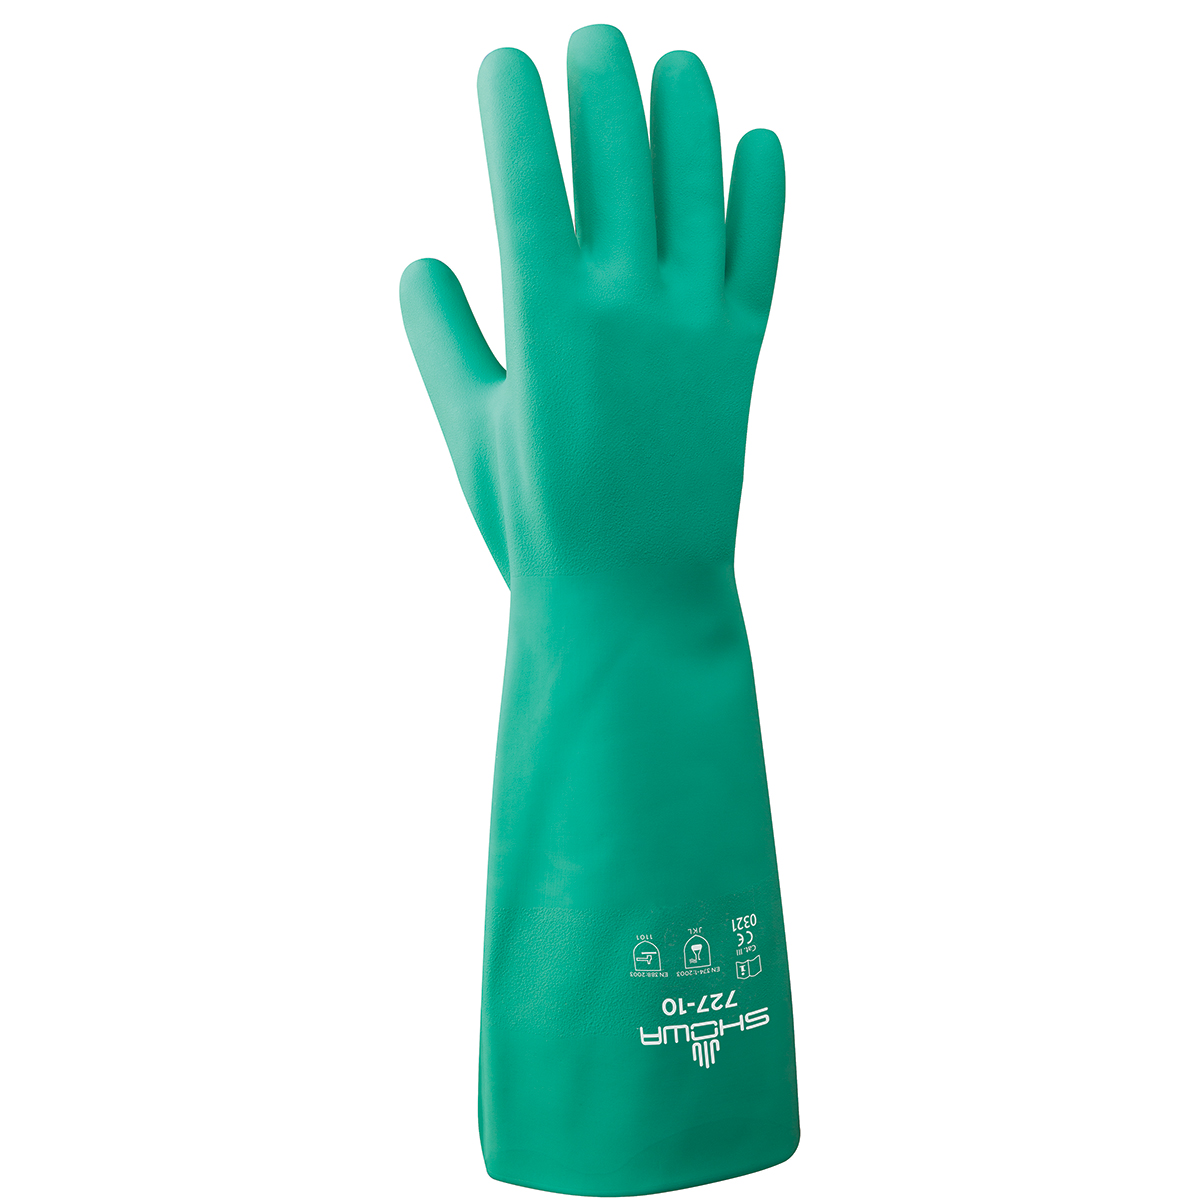 Chemical resistant unsupported nitrile, 13", 15-mil, light green, bisque finish, unlined, medium